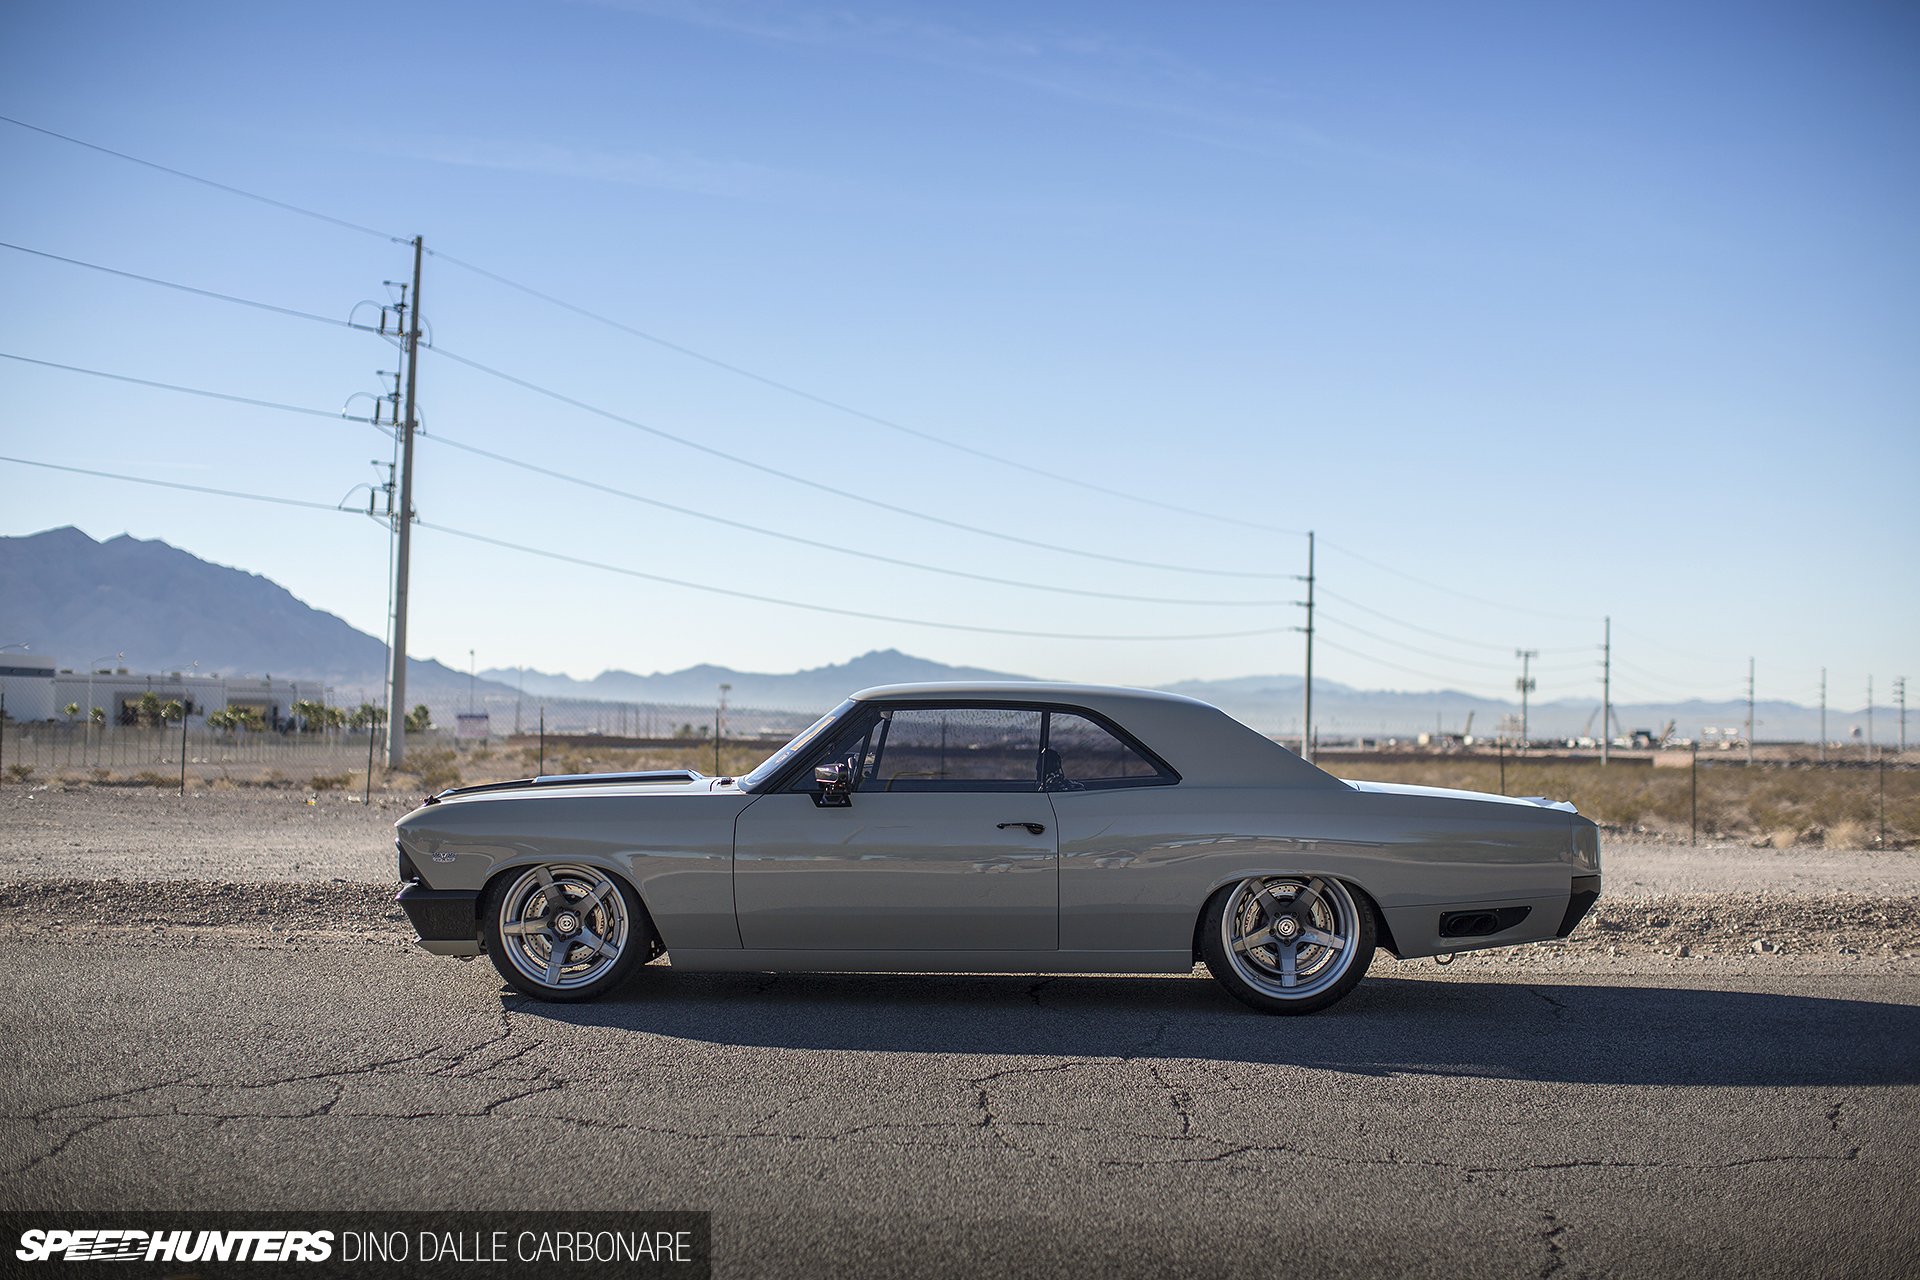 1966, Chevrolet, Chevelle, Recoil, Muscle, Hot, Rod, Rods, Classic Wallpaper